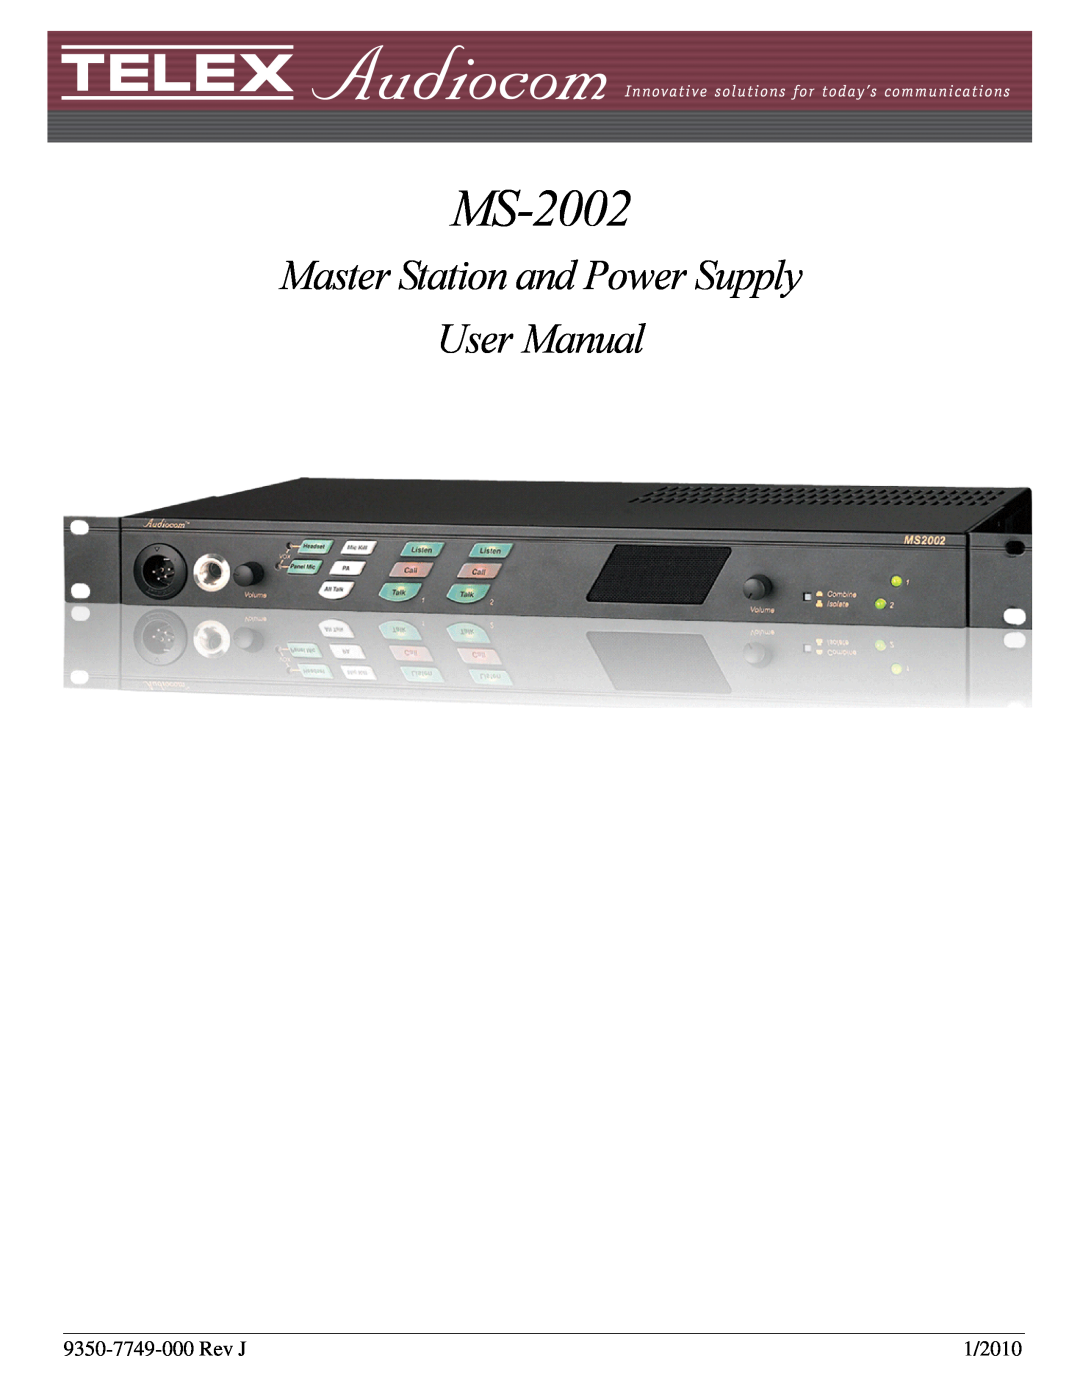 Telex MS-2002 user manual Master Station and Power Supply User Manual, Rev J, 1/2010 